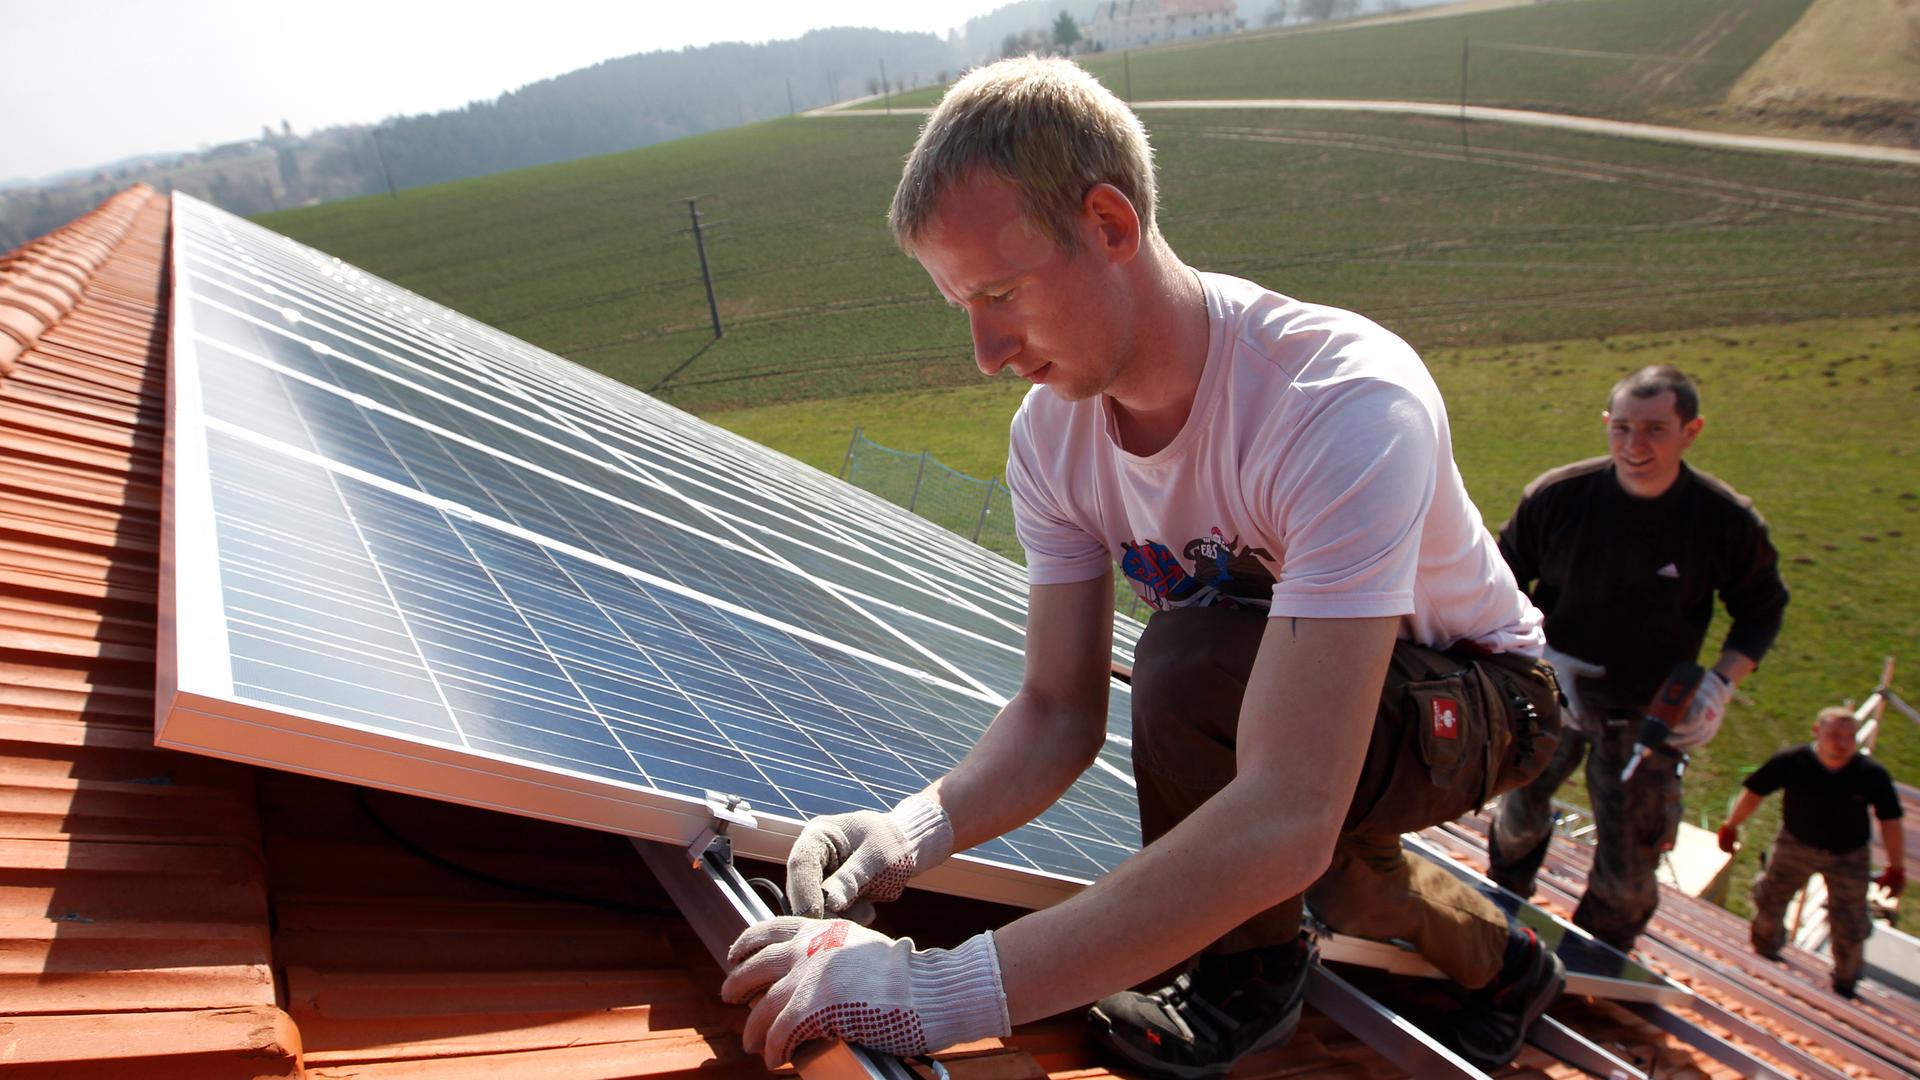 Solar power production has grown more than 25 times over the last decade in Germany, spurred largely by big incentives for small producers to get into the market. But sunshine and wind power are intermittent, so engineers and others are looking for ways t